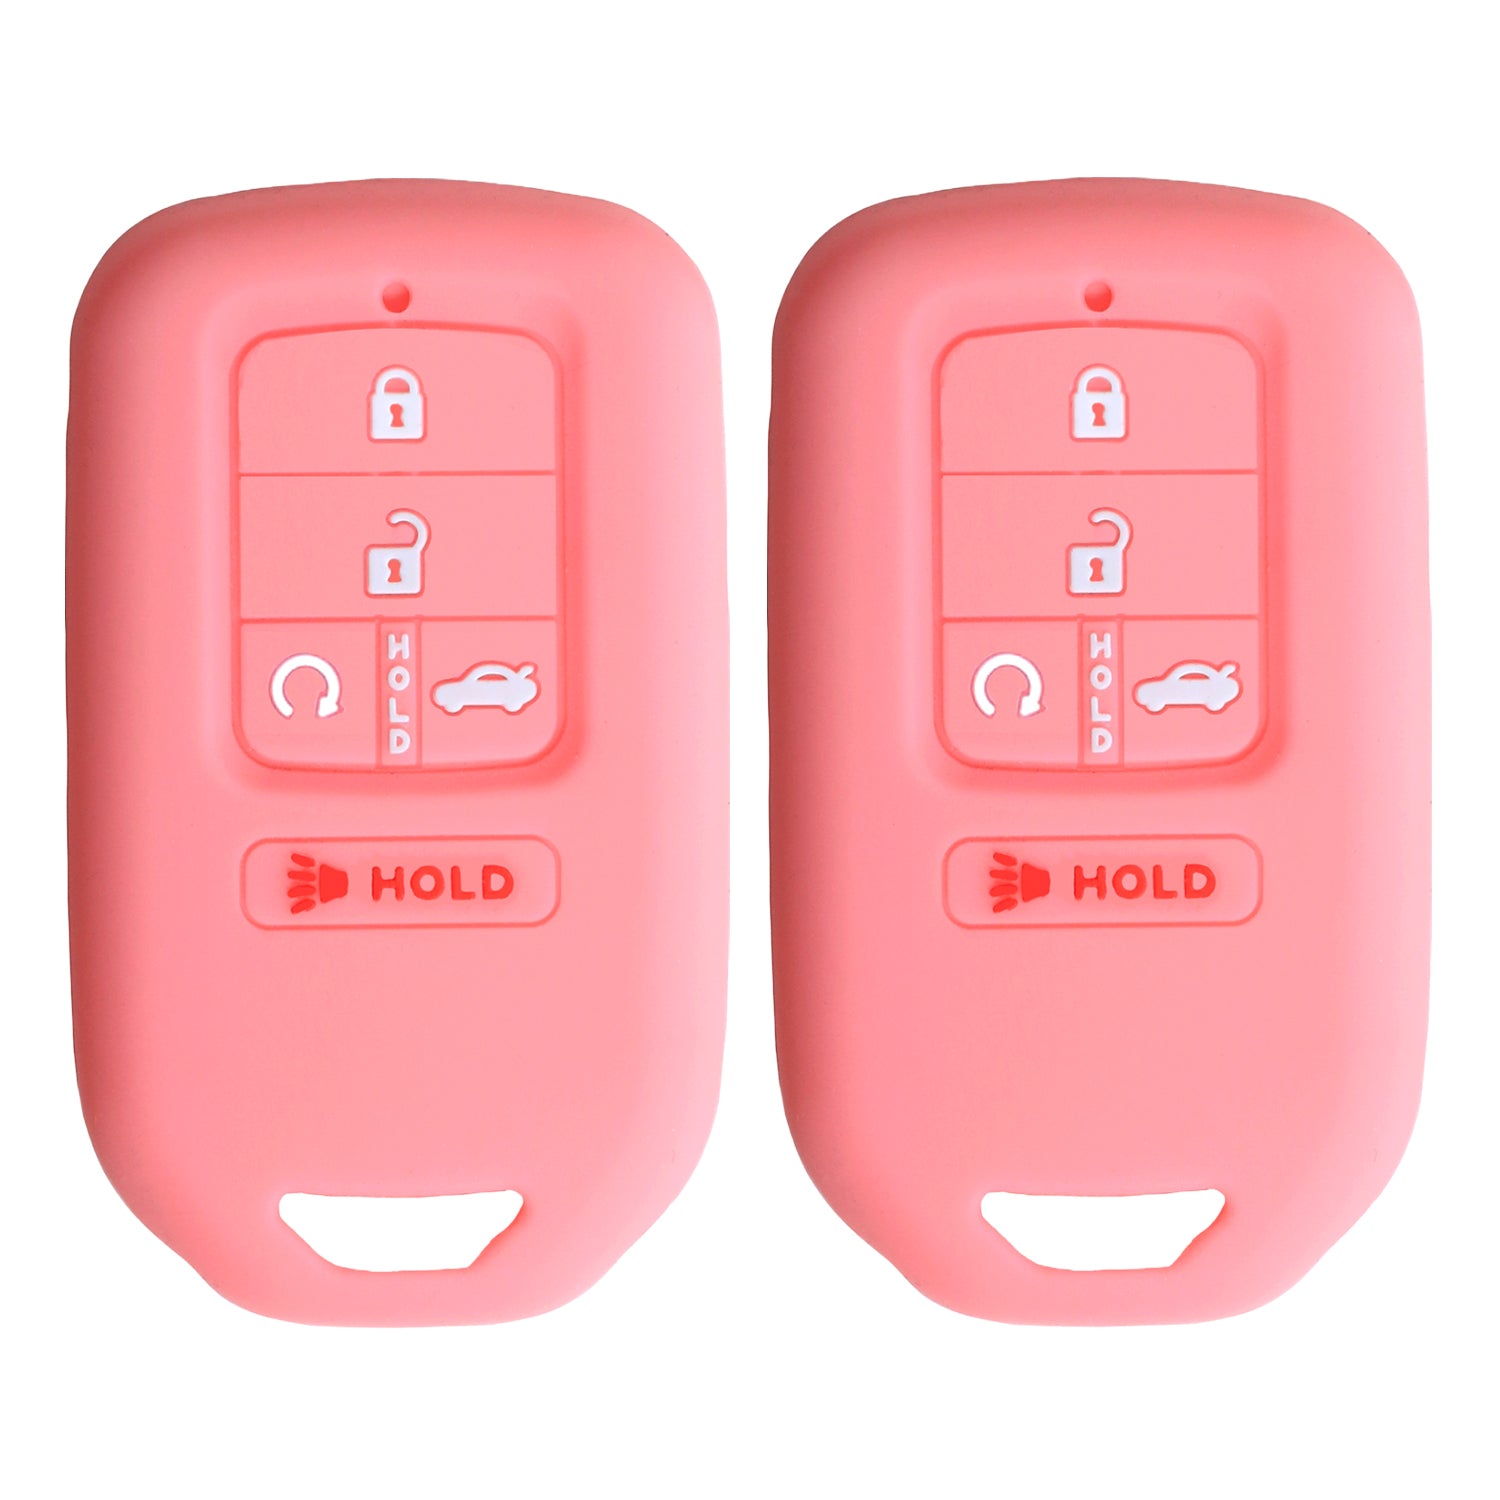 Silicone Case for Keyless entry Smart key fob for Honda Accord Civic CR-V CRV Pilot Passport Insight EX EX-L Touring | Car Accessory | Key Protection Case 2 Pcs (Double Pink)